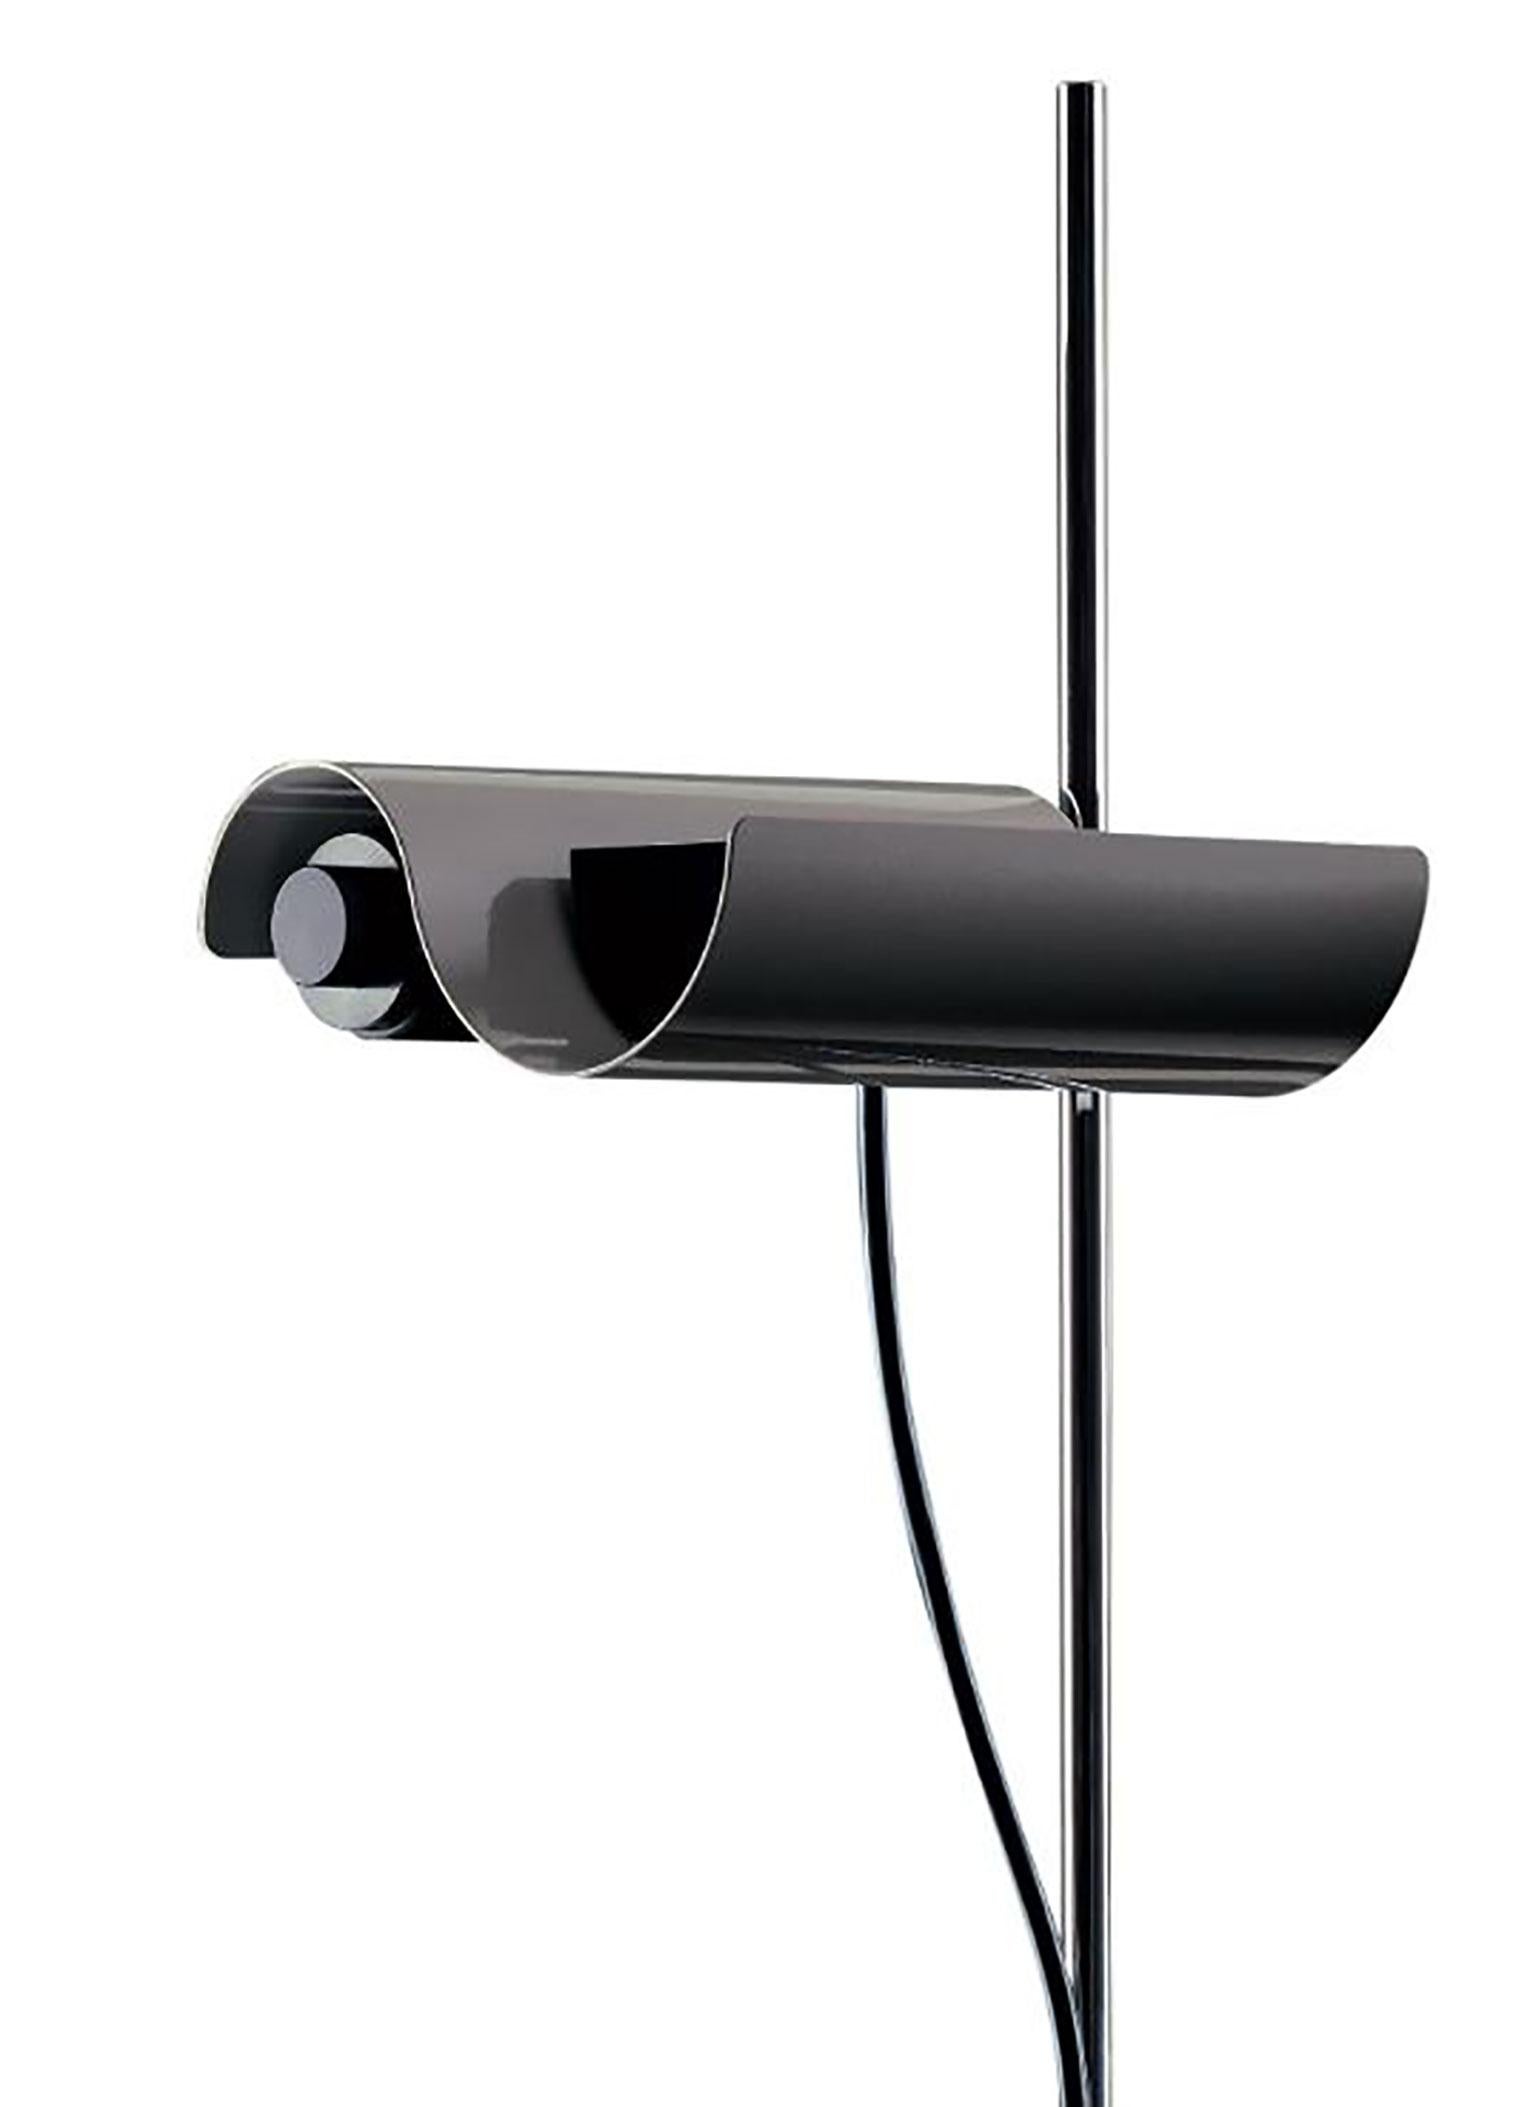 Dim floor lamp is designed by Vico Magestretti for Oluce. Vico Magistretti was a picture of mid-20th century design, operating on everything from architectural and automated commissions to products for the home. During his career, he won the